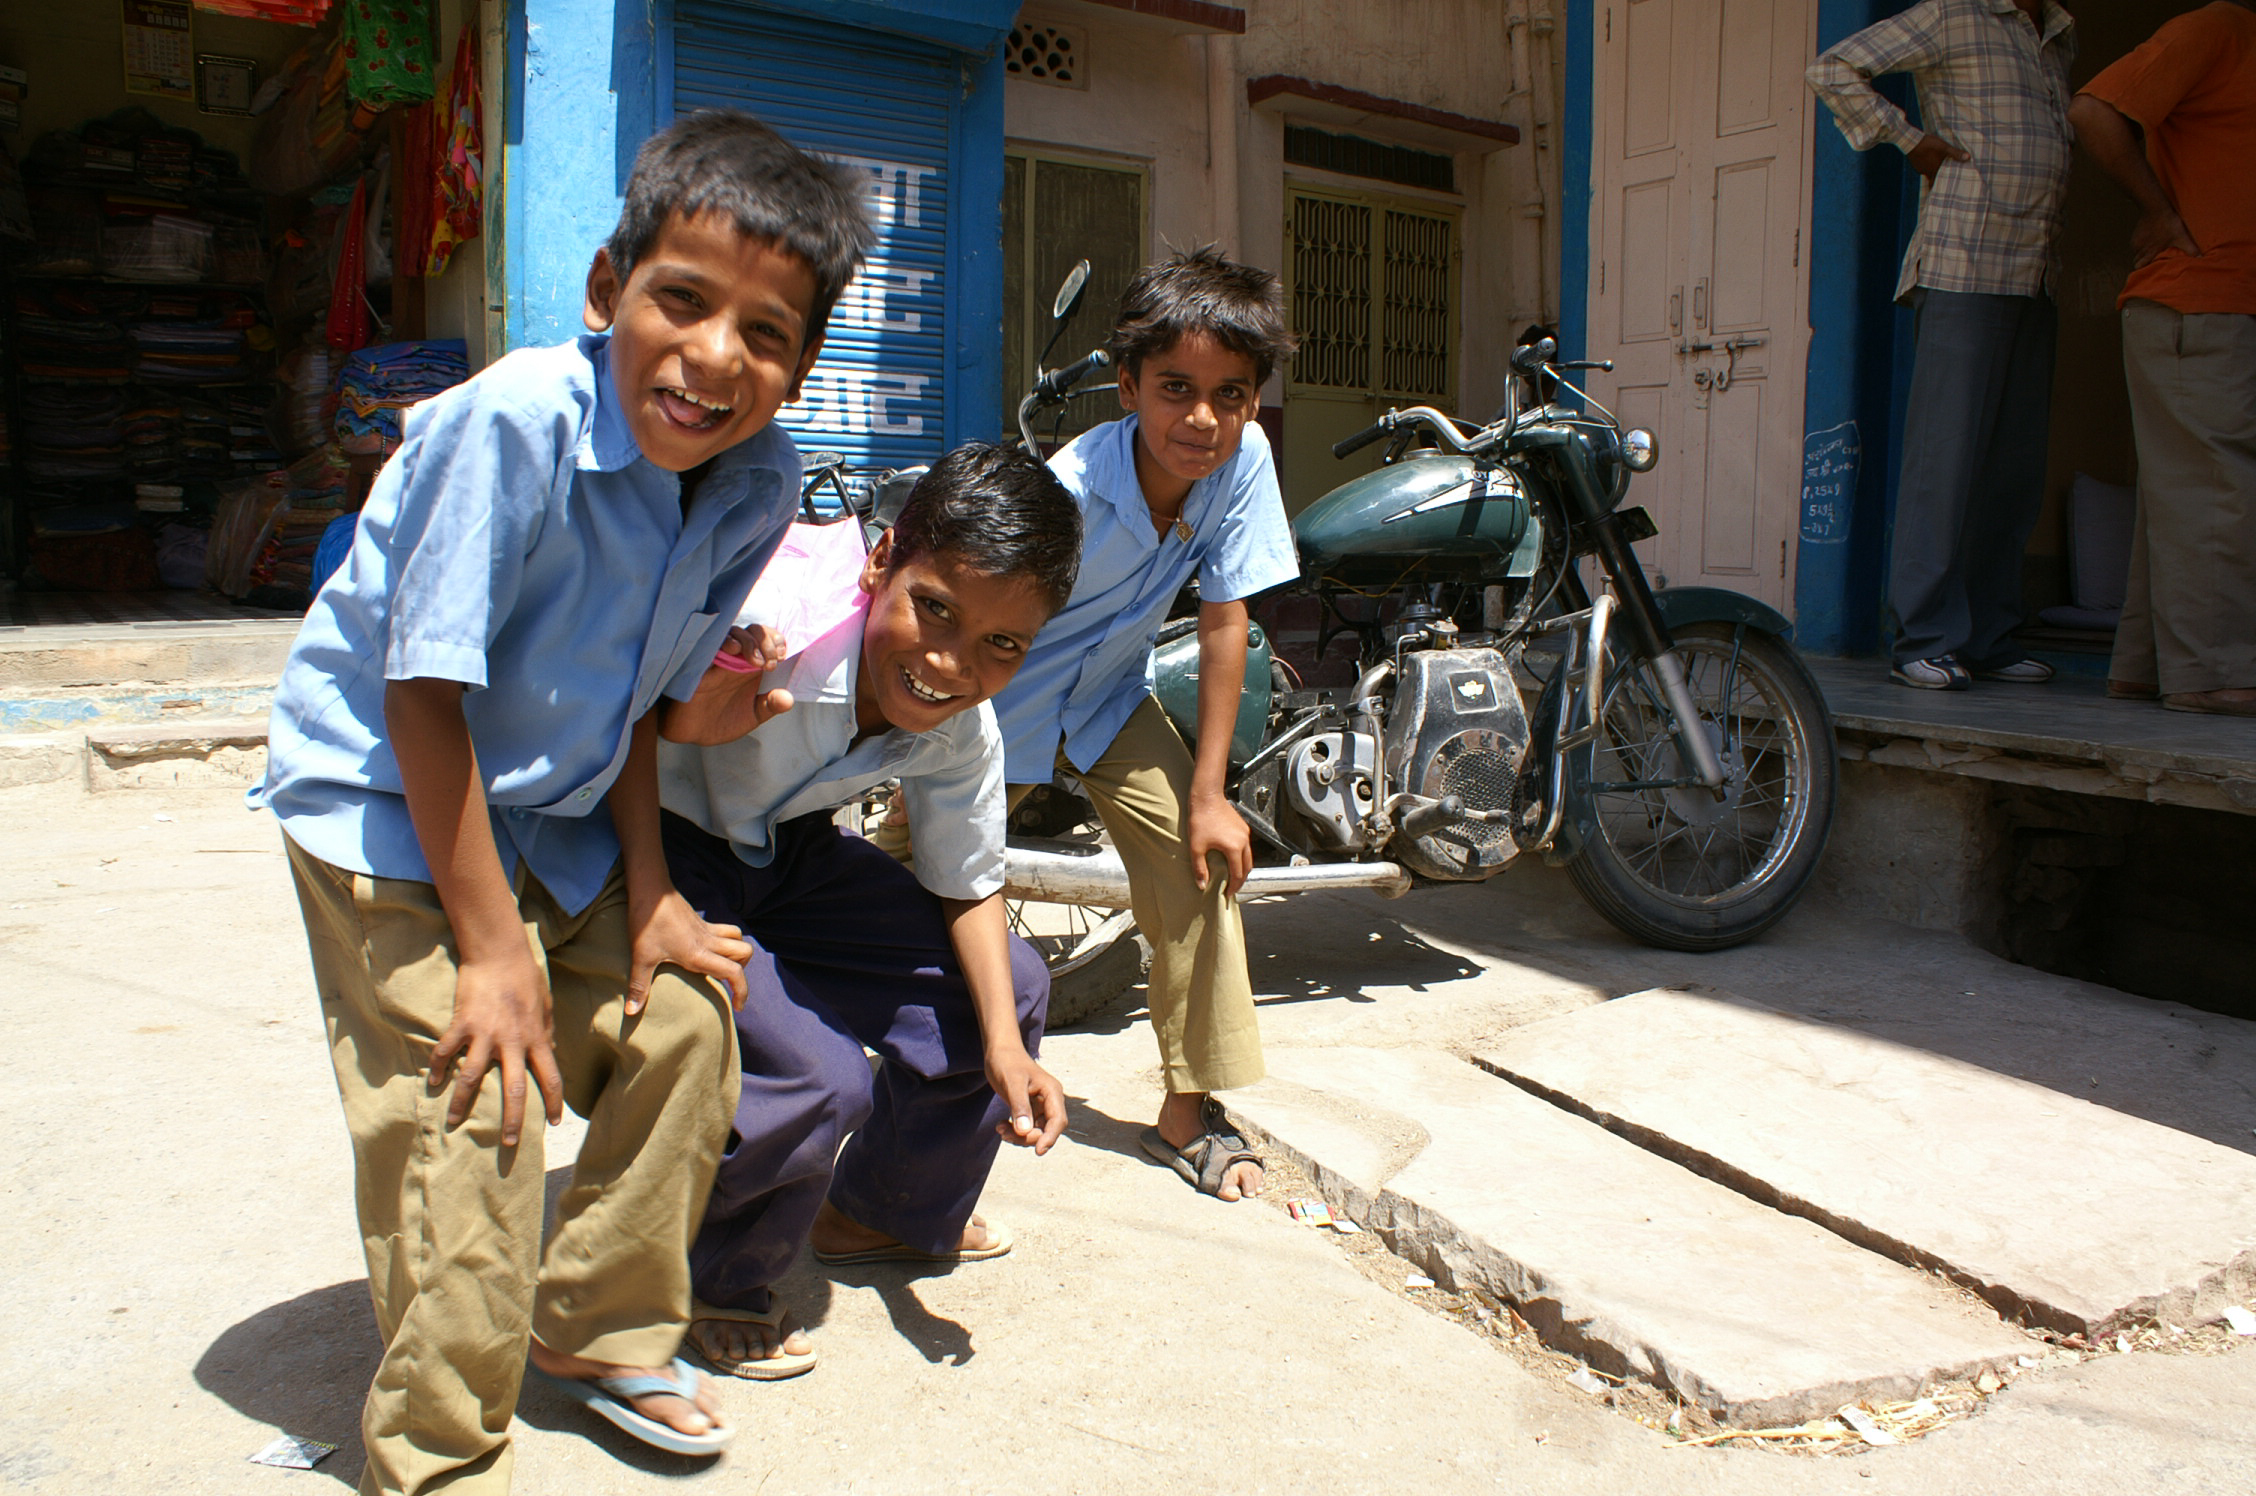 Boys posing in front of motorcycle in Rajasthan, India